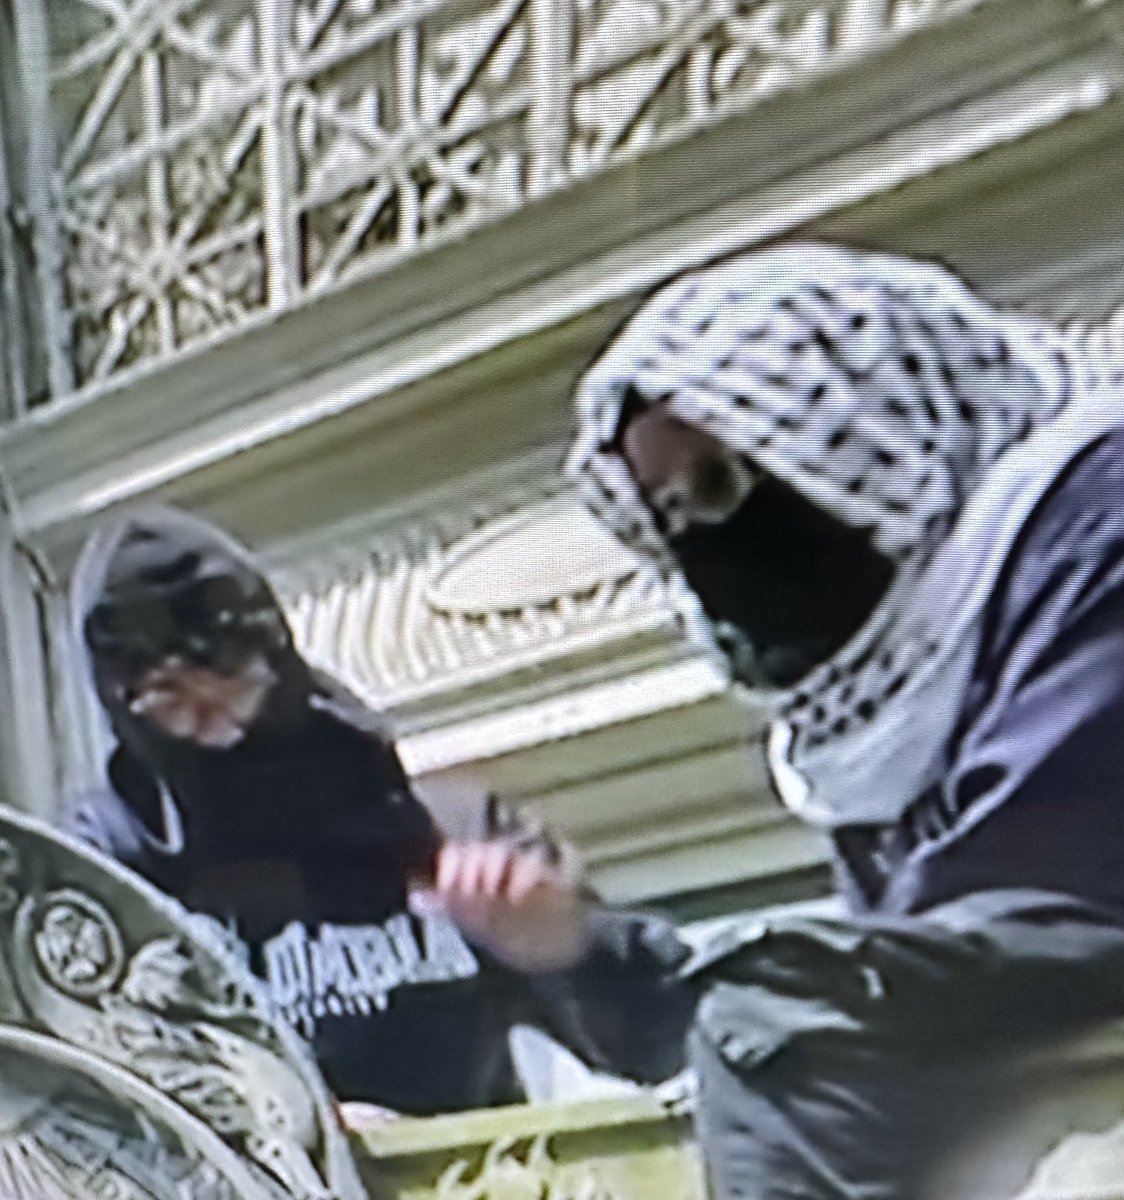 Columbia University. They’re not protesters they’re terrorists. They want to negotiate. Really? They’re cowards for covering their faces. If they were KKK it would be a different story. Hey ⁦@SenSchumer⁩ ⁦@RepJerryNadler⁩ you’re Jewish. Crickets coming from y’all.